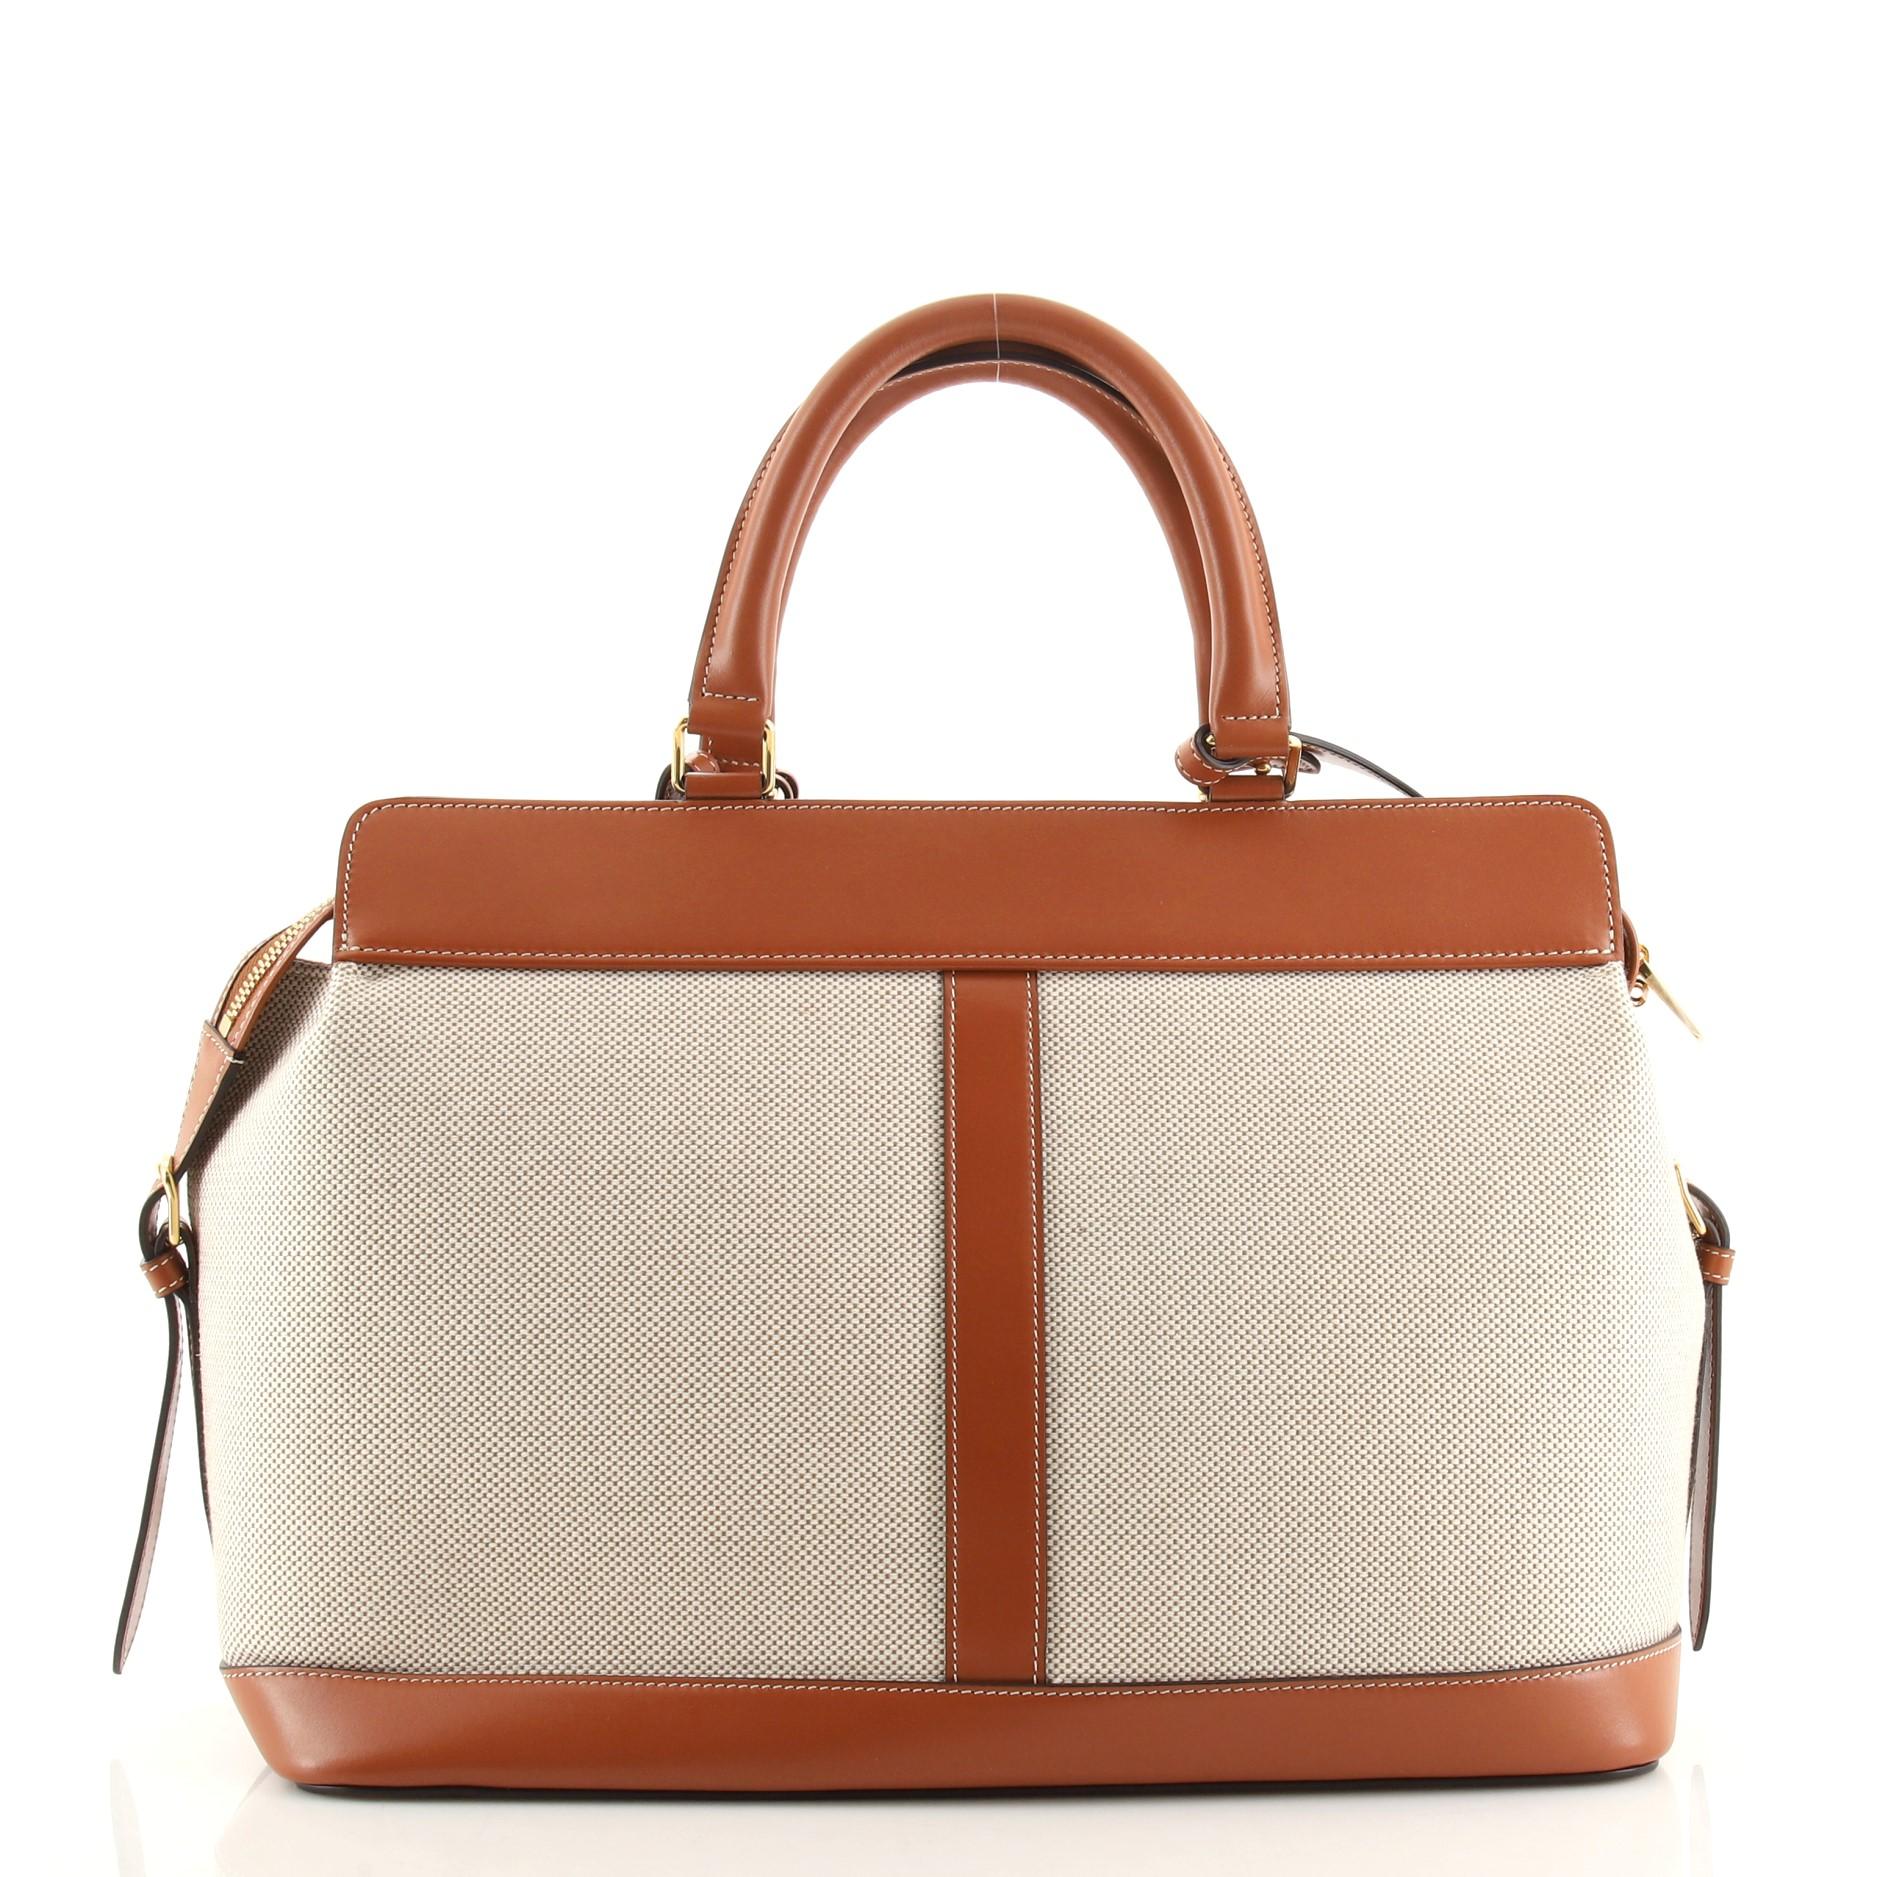 Celine Cabas de France Tote Canvas with Leather Medium. Minor scuffs and indentations on leather base trim, creasing on handles, minor cracking on handle base wax edges, scratches on hardware. 

78689MSC